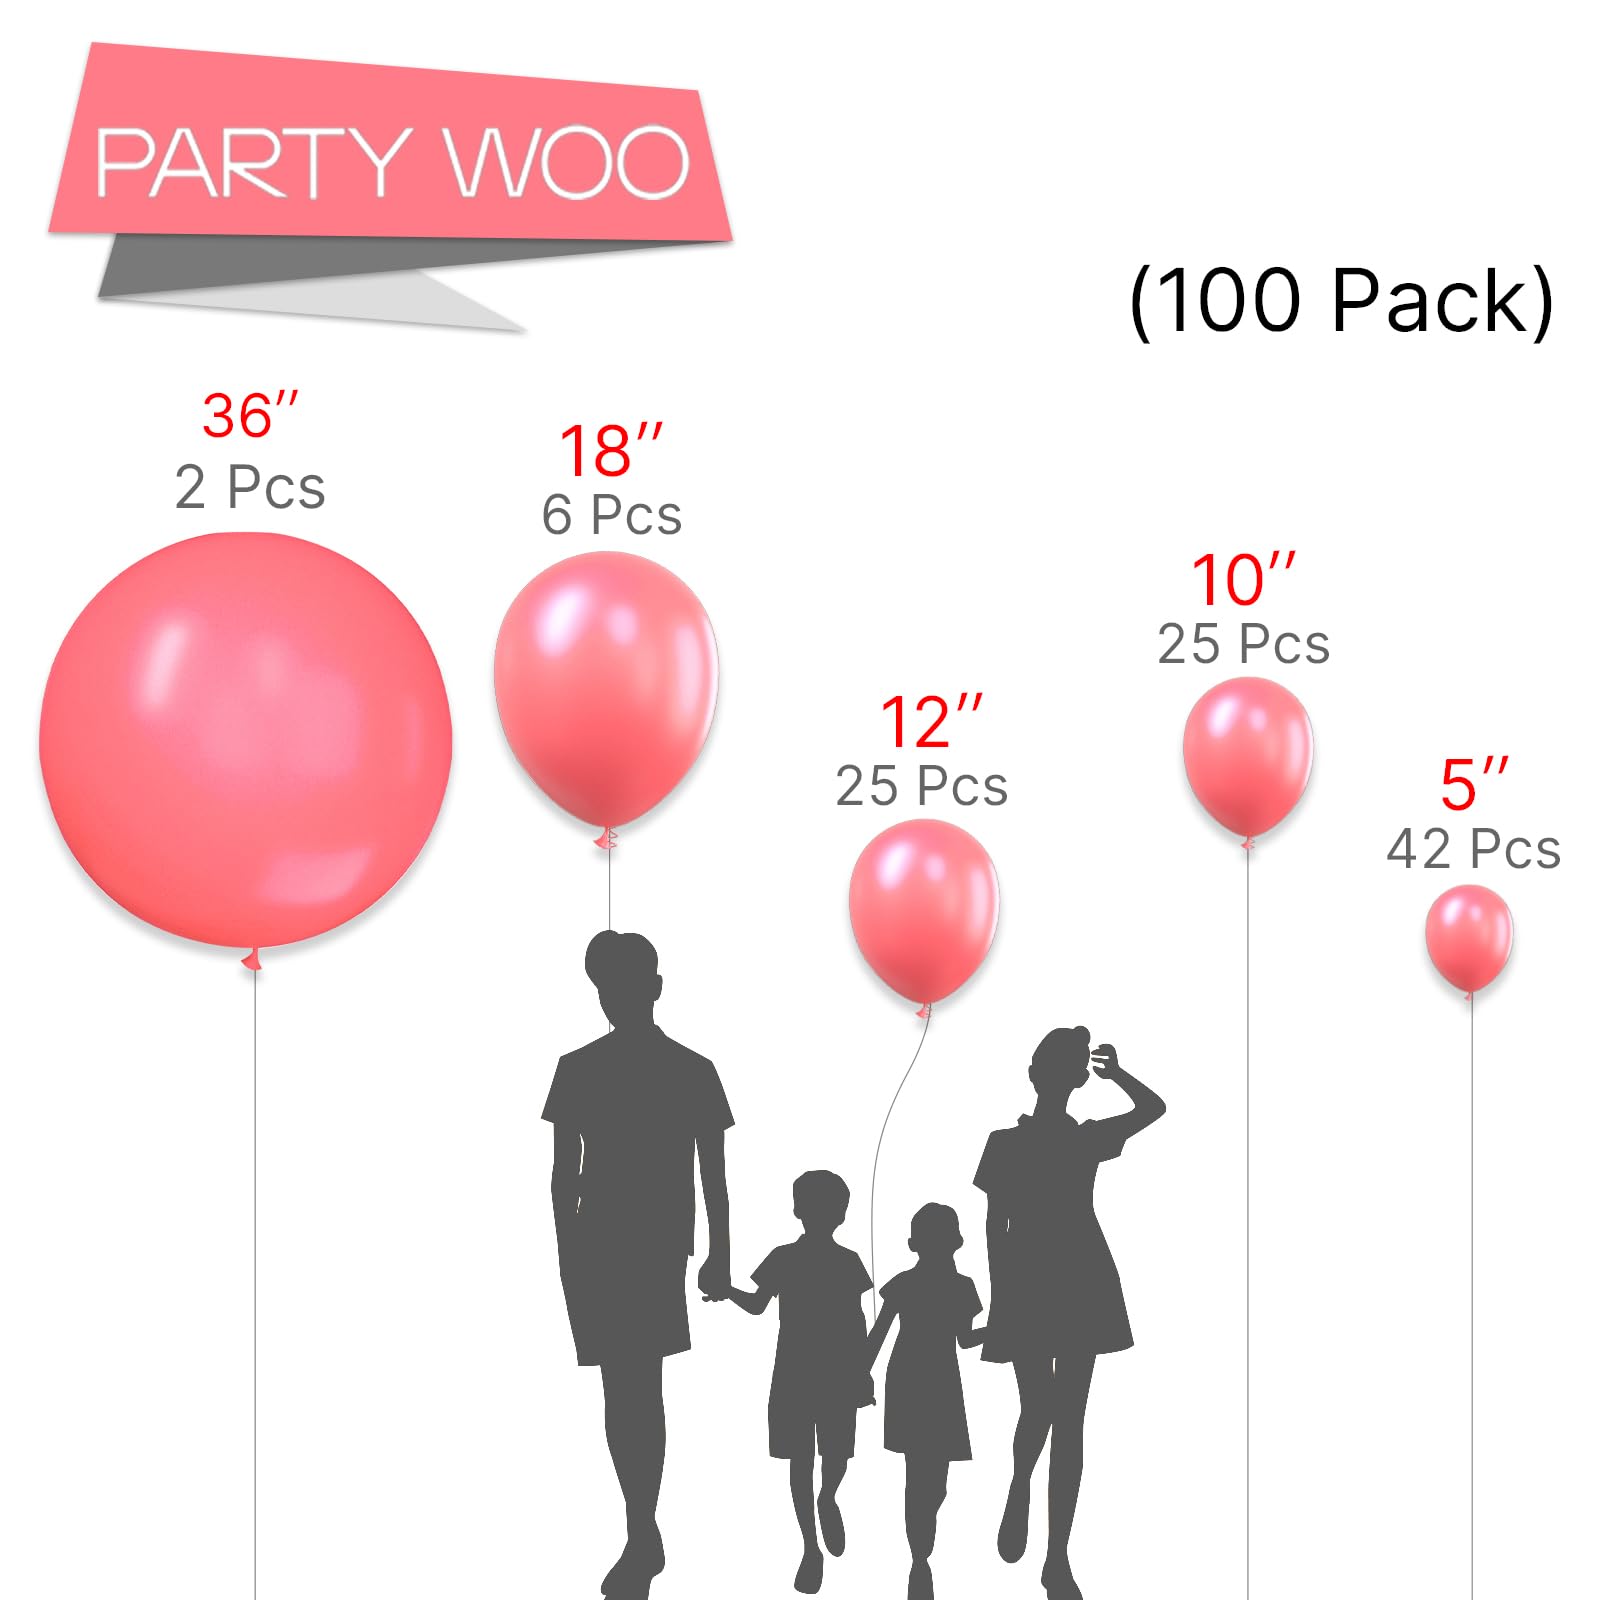 PartyWoo Watermelon Pink Balloons, 100 pcs Pink Balloons Different Sizes Pack of 36 Inch 18 Inch 12 Inch 10 Inch 5 Inch Pink Balloons for Balloon Garland or Balloon Arch as Party Decorations, Pink-Q11